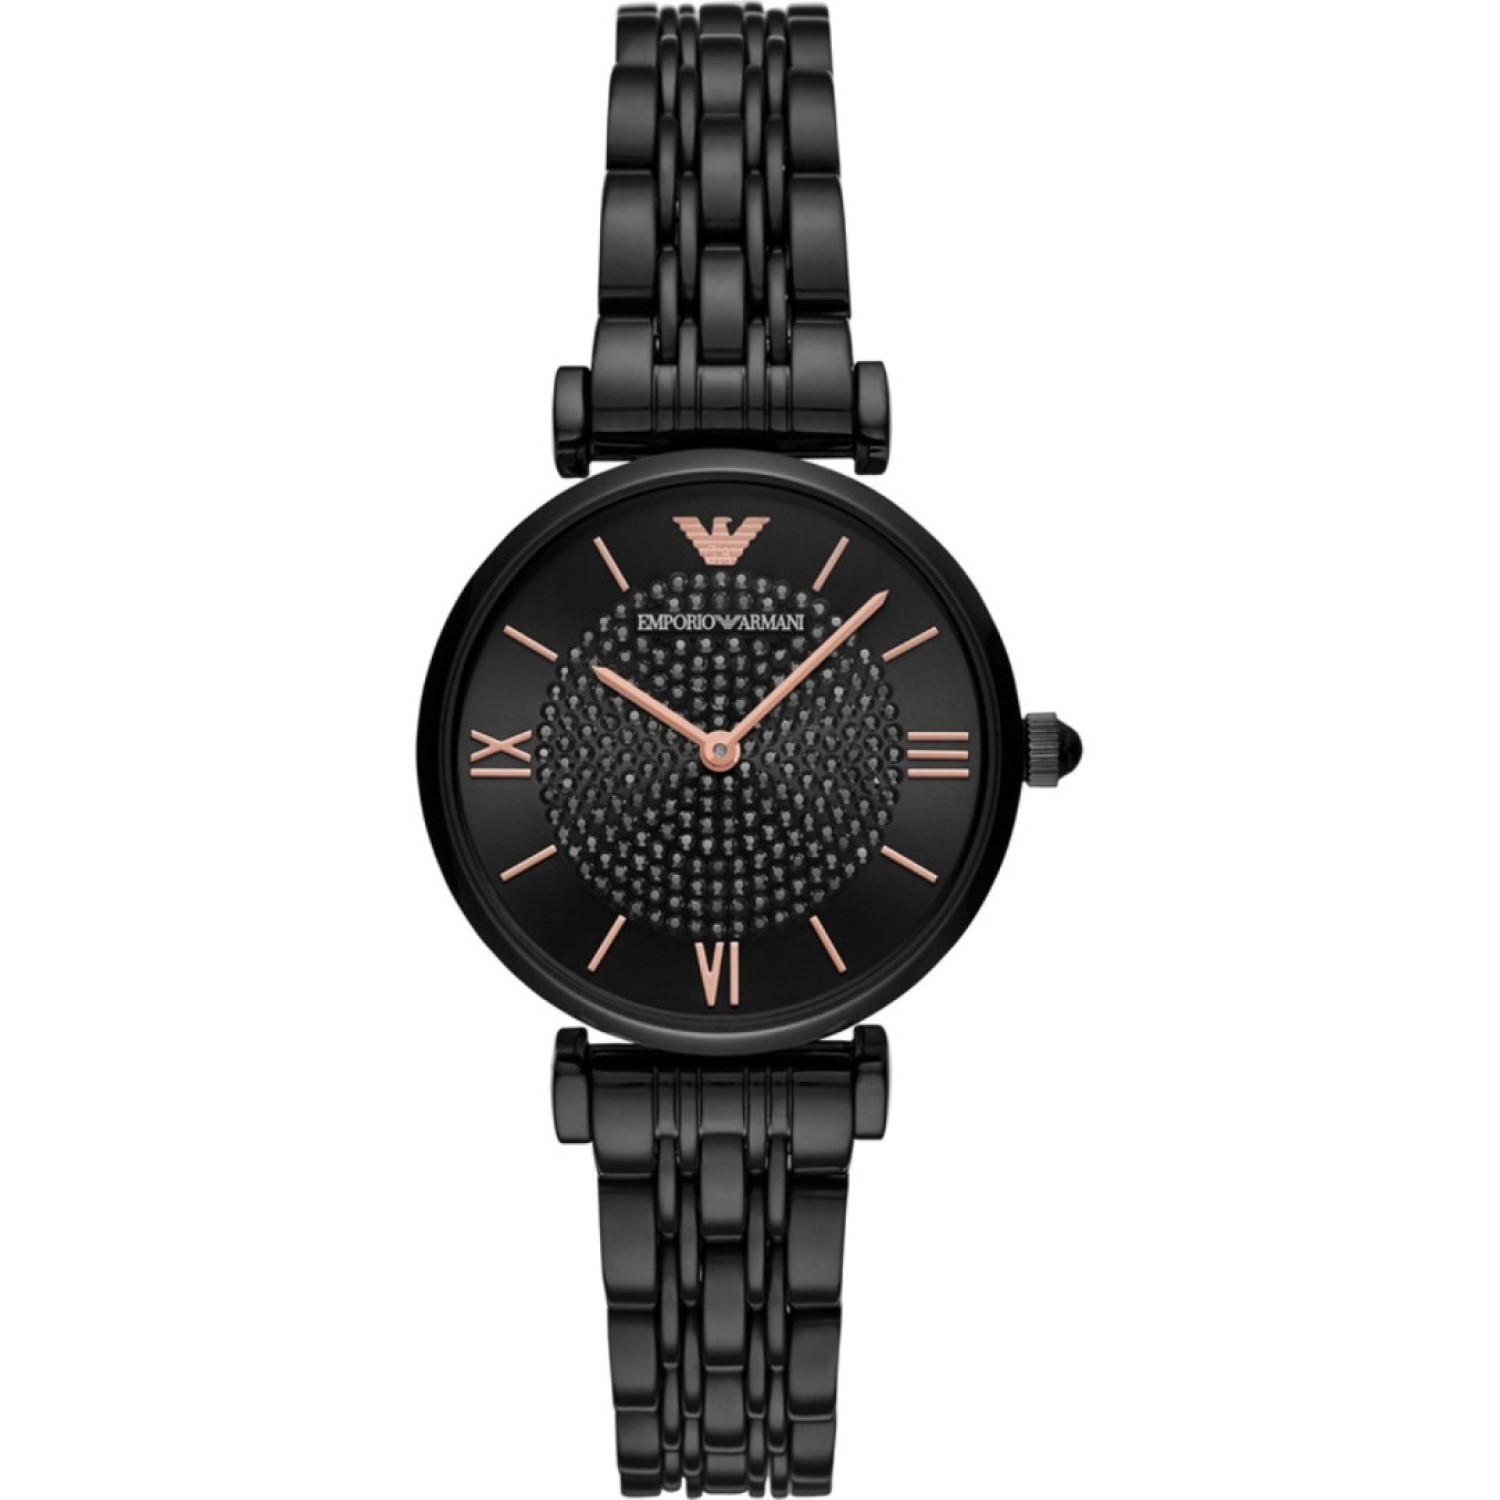 AR11245 Emporio Armani Womens Two-Hand Black Stainless Steel Watch. The Emporio Armani AR11245 is a stylish and elegant timepiece designed to make a statement.